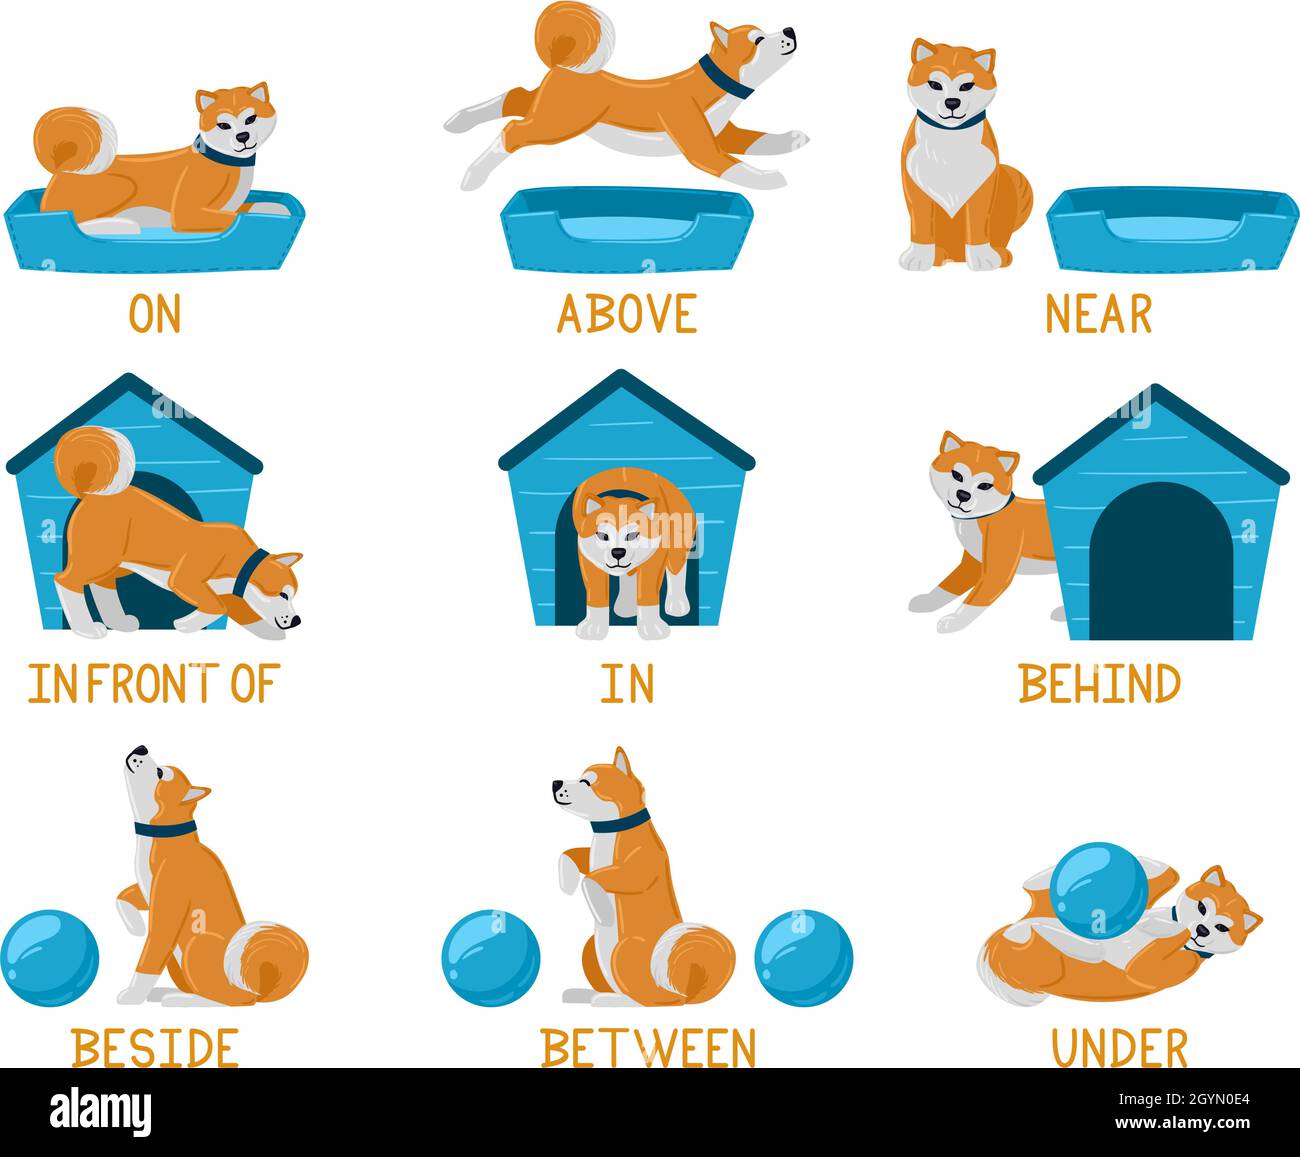 Learning english prepositions with cute cartoon puppy dog. Cute akita dog  above, behind, under, near dog bed or dog house illustration set. English  Stock Vector Image & Art - Alamy